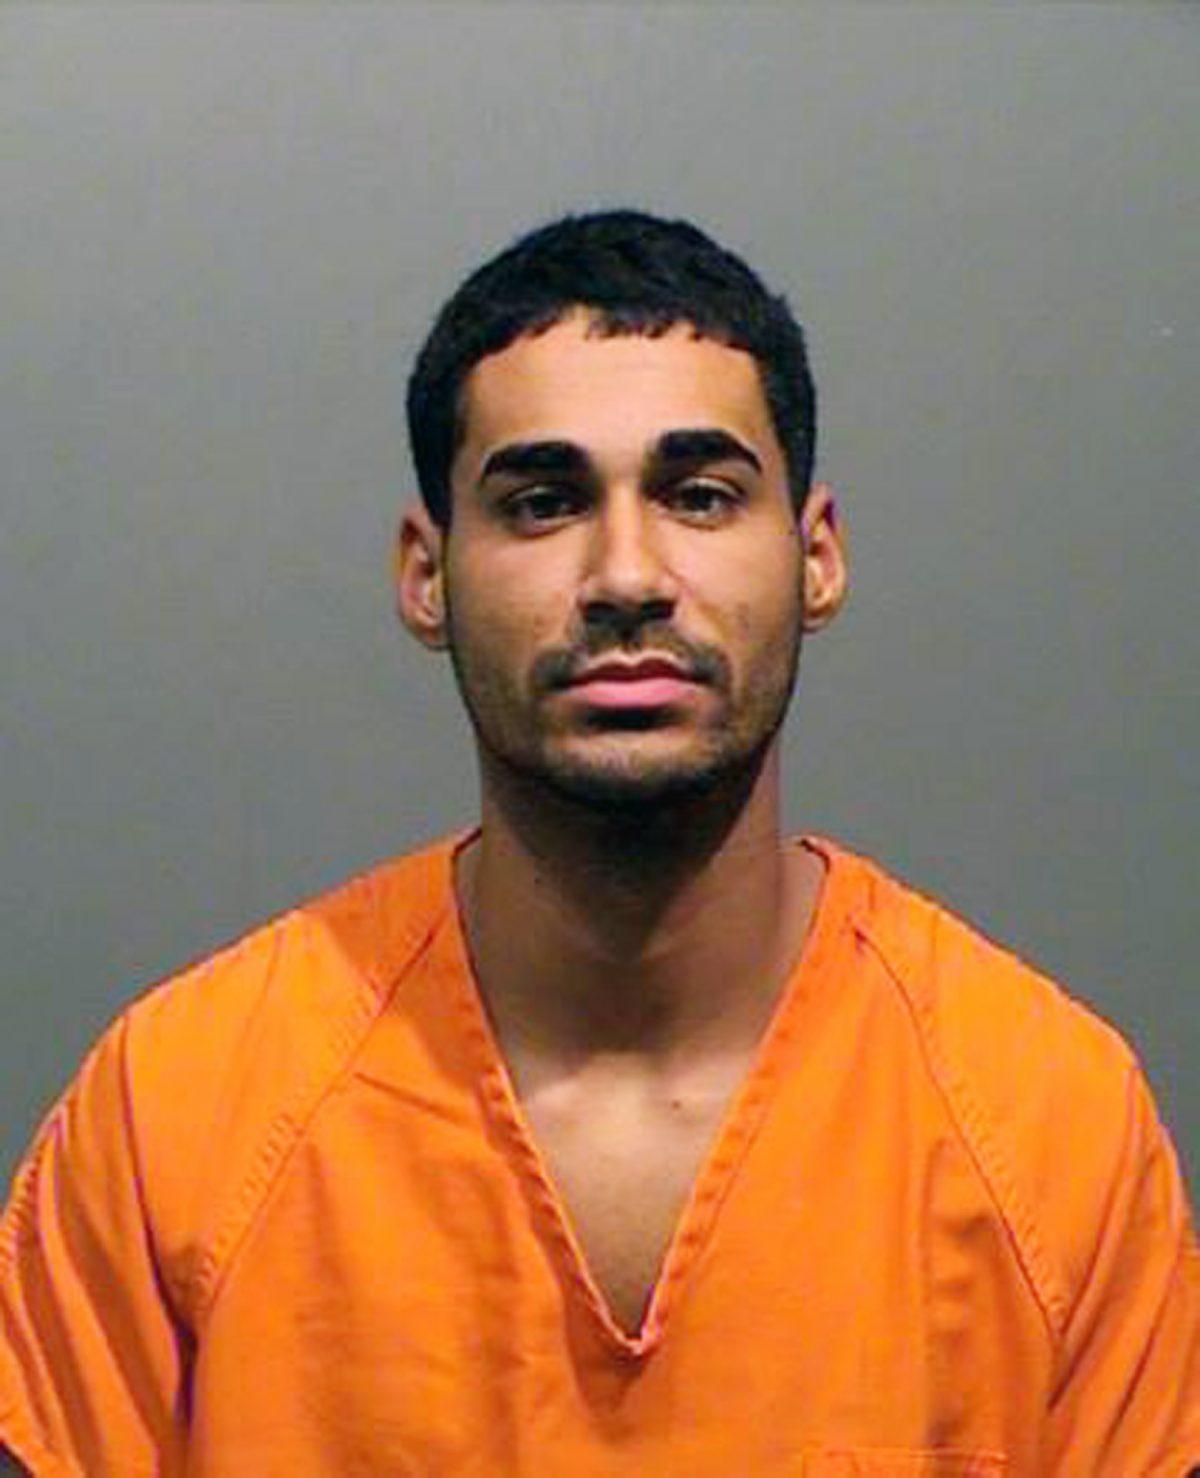 This photo provided by the Lakewood Police Department on April 26, 2019, shows Rogel Lazaro Aguilera-Mederos, 23. The truck driver was arrested Friday on suspicion of vehicular homicide. Police are blaming him for causing a deadly pileup on Interstate 70 near Denver on April 25, 2019. (Lakewood Police Department via AP)